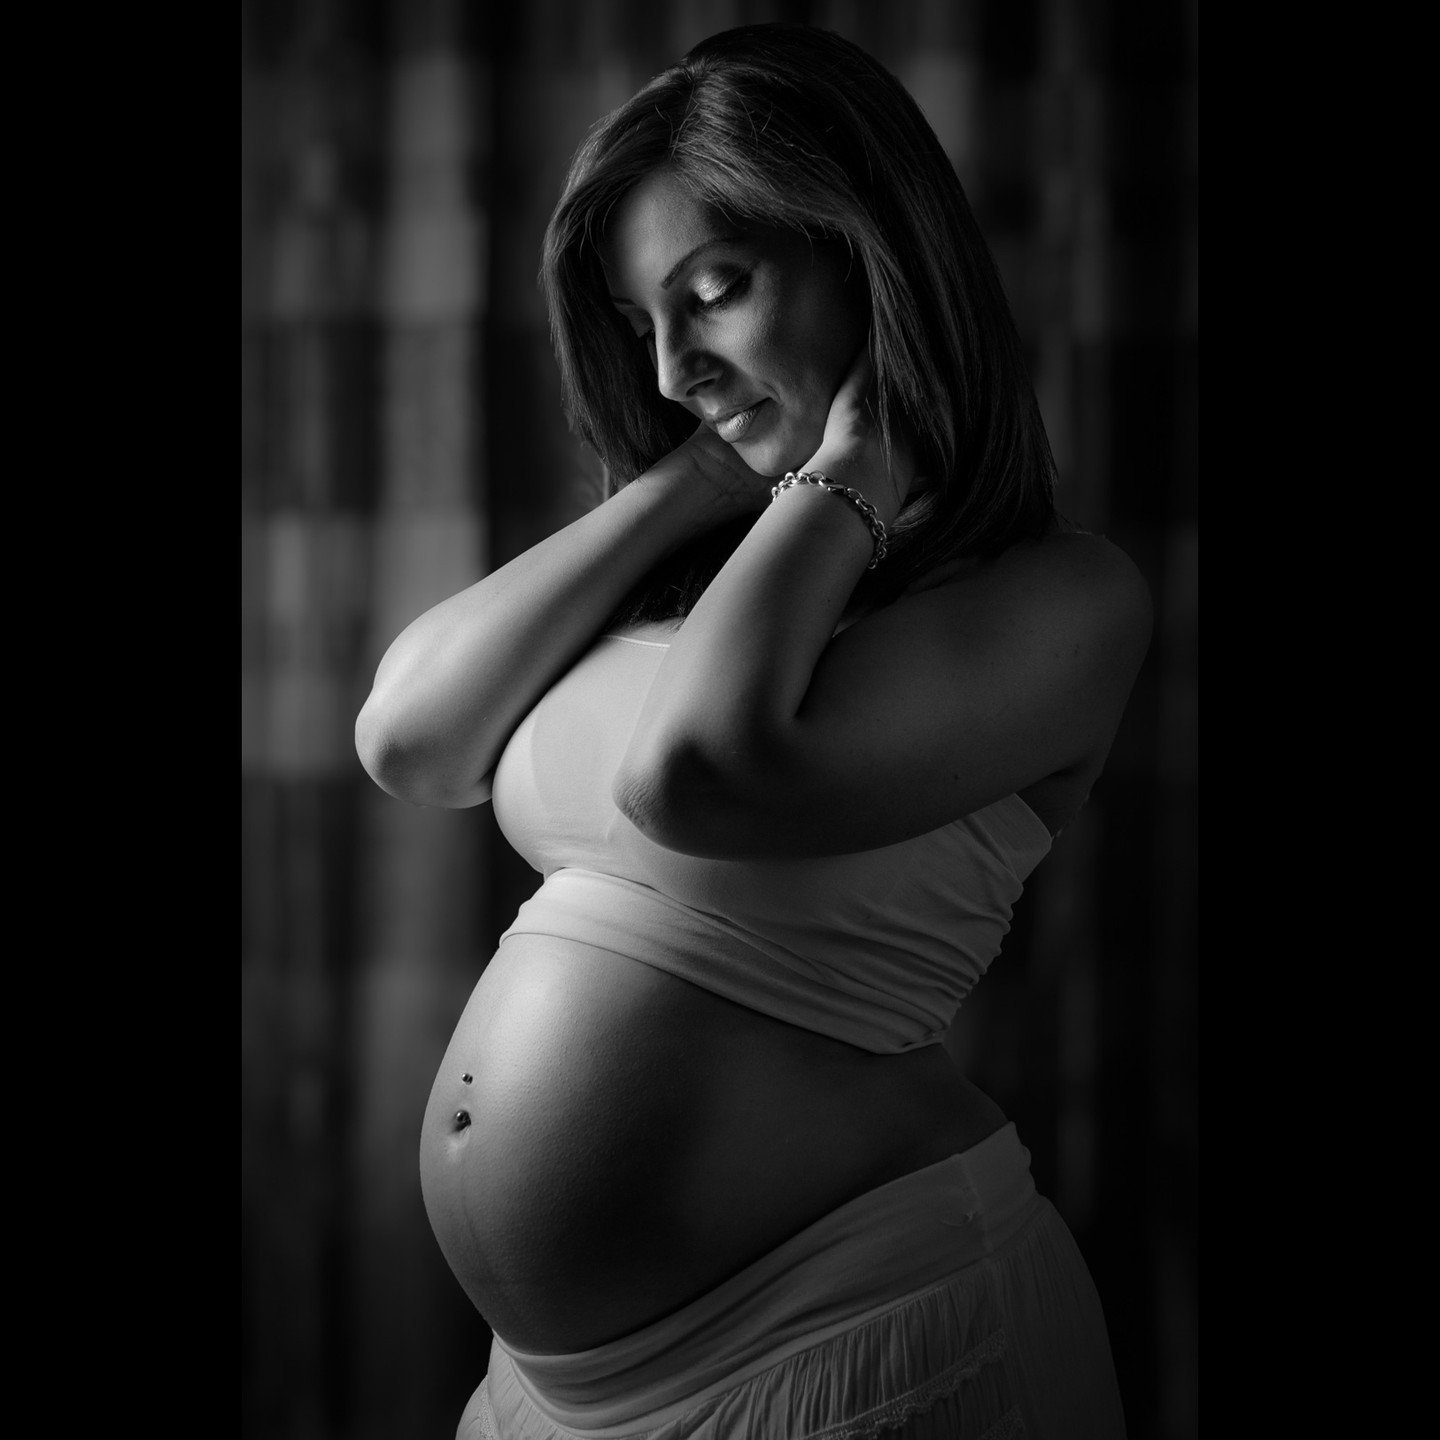 An older shot with this beautiful mom who had a very natural predisposition to posing.
We had a great time shooting together.

The miracle of life is something no man can fully comprehend. 

Shot on #Nikon #D800 and Nikon 24-70 VR

#maternity #matern